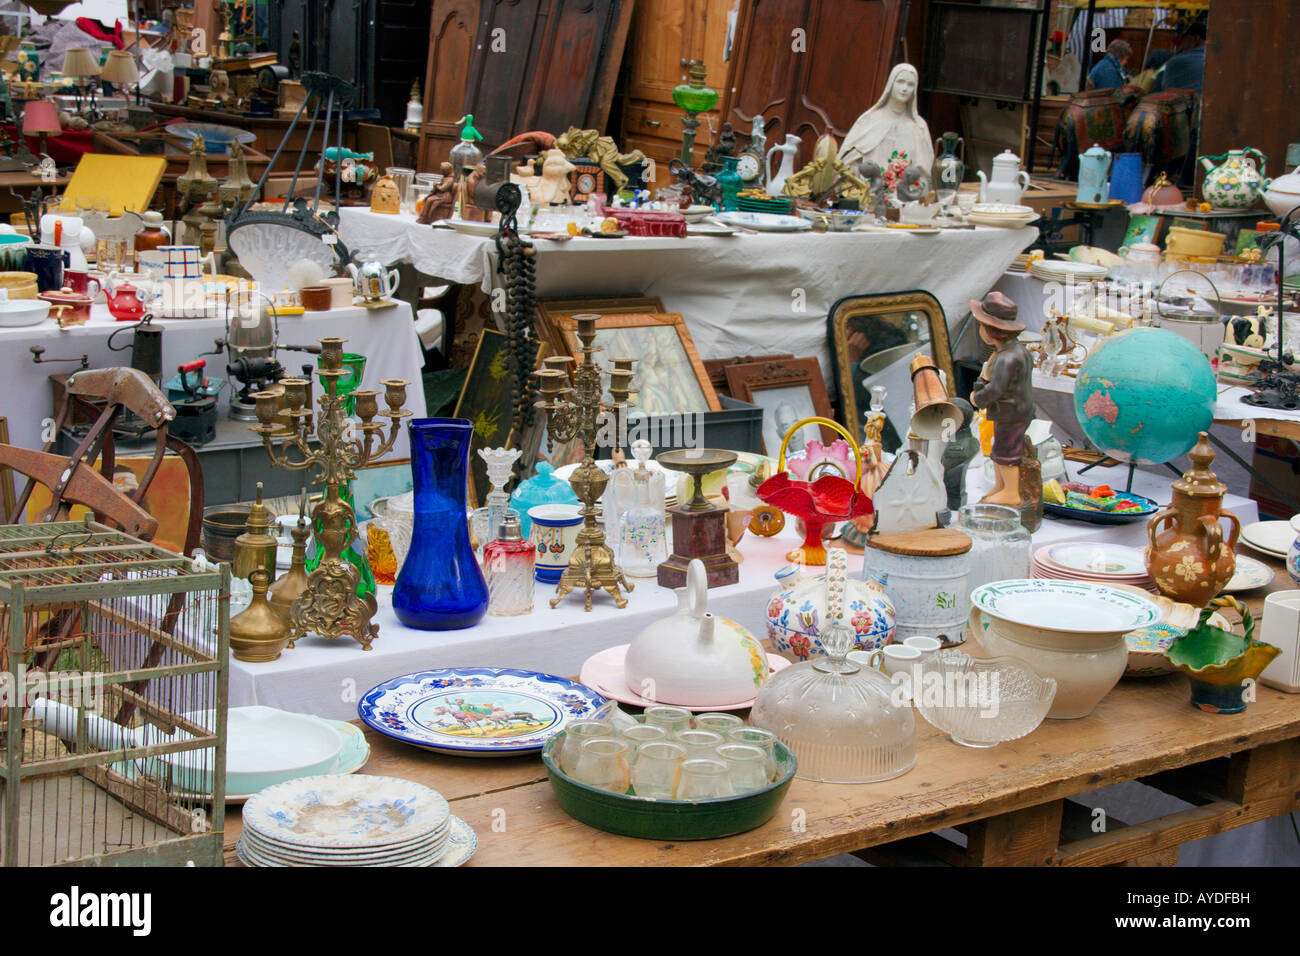 French street market selling bric-a-brac, brocante, and antique items Stock Photo